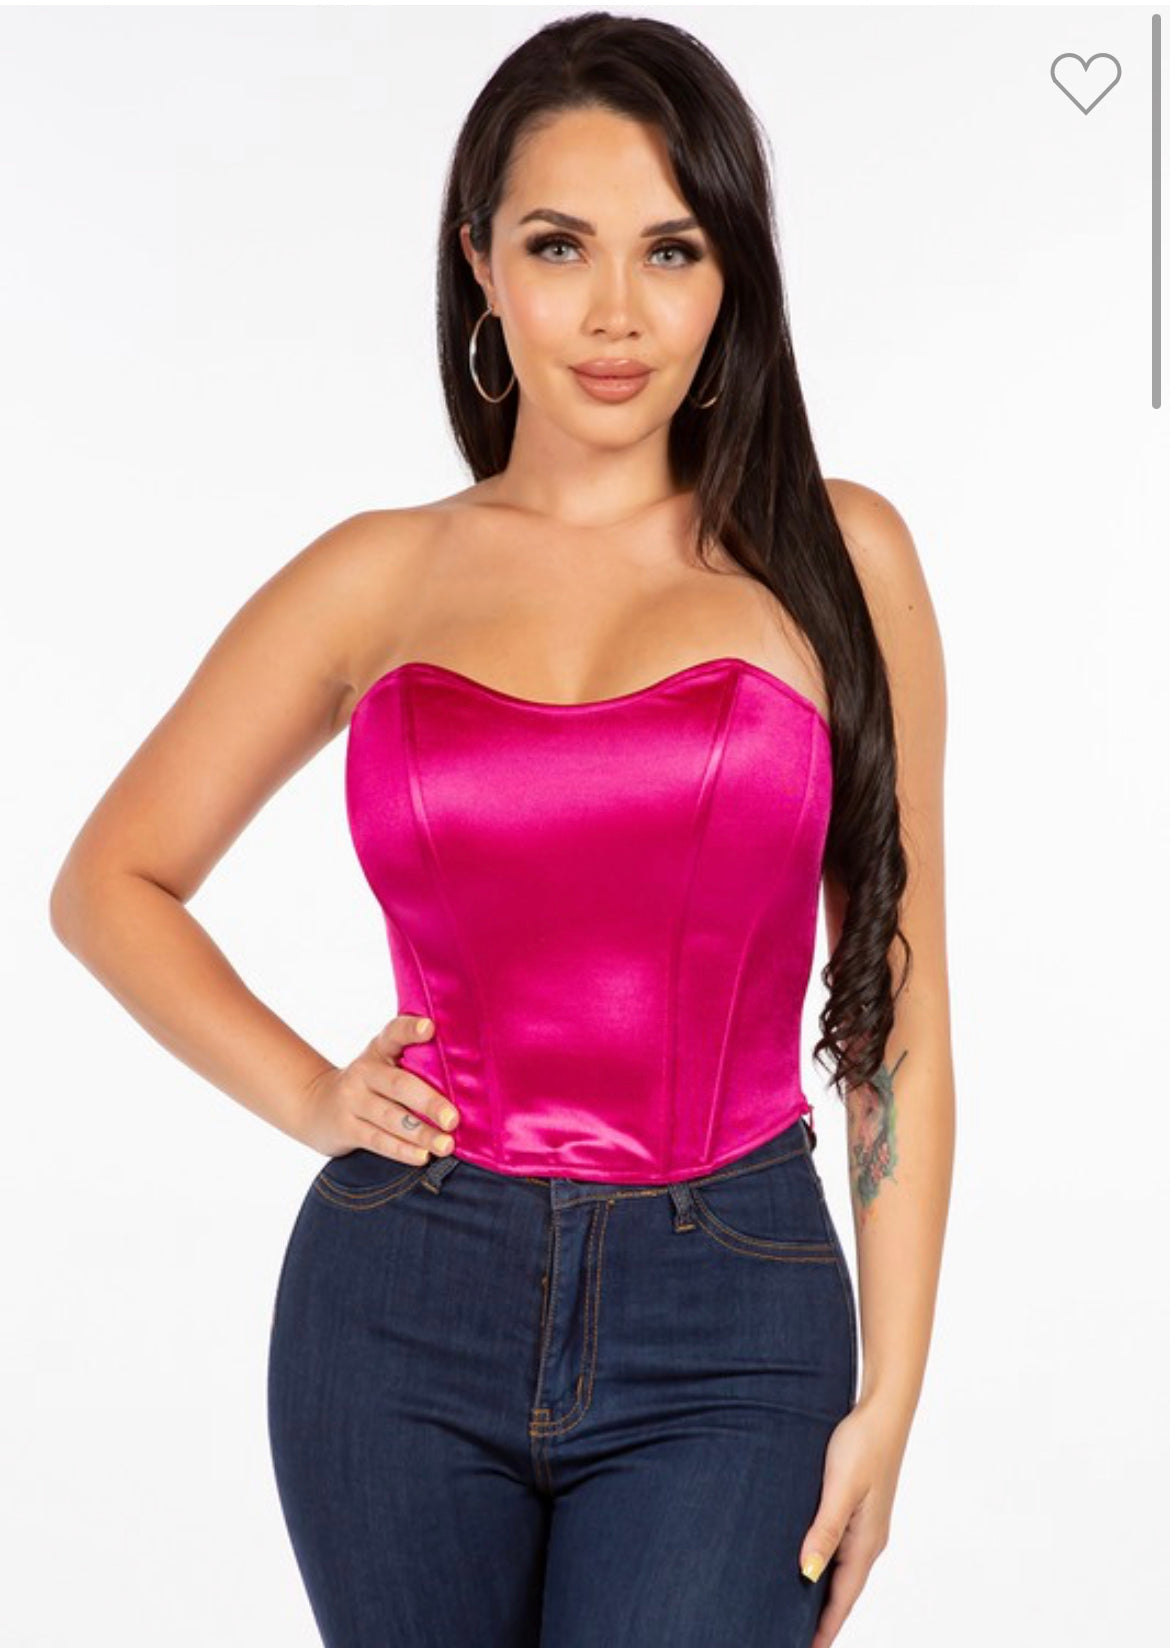 SATIN CORSET BUSTIER IN HOT PINK